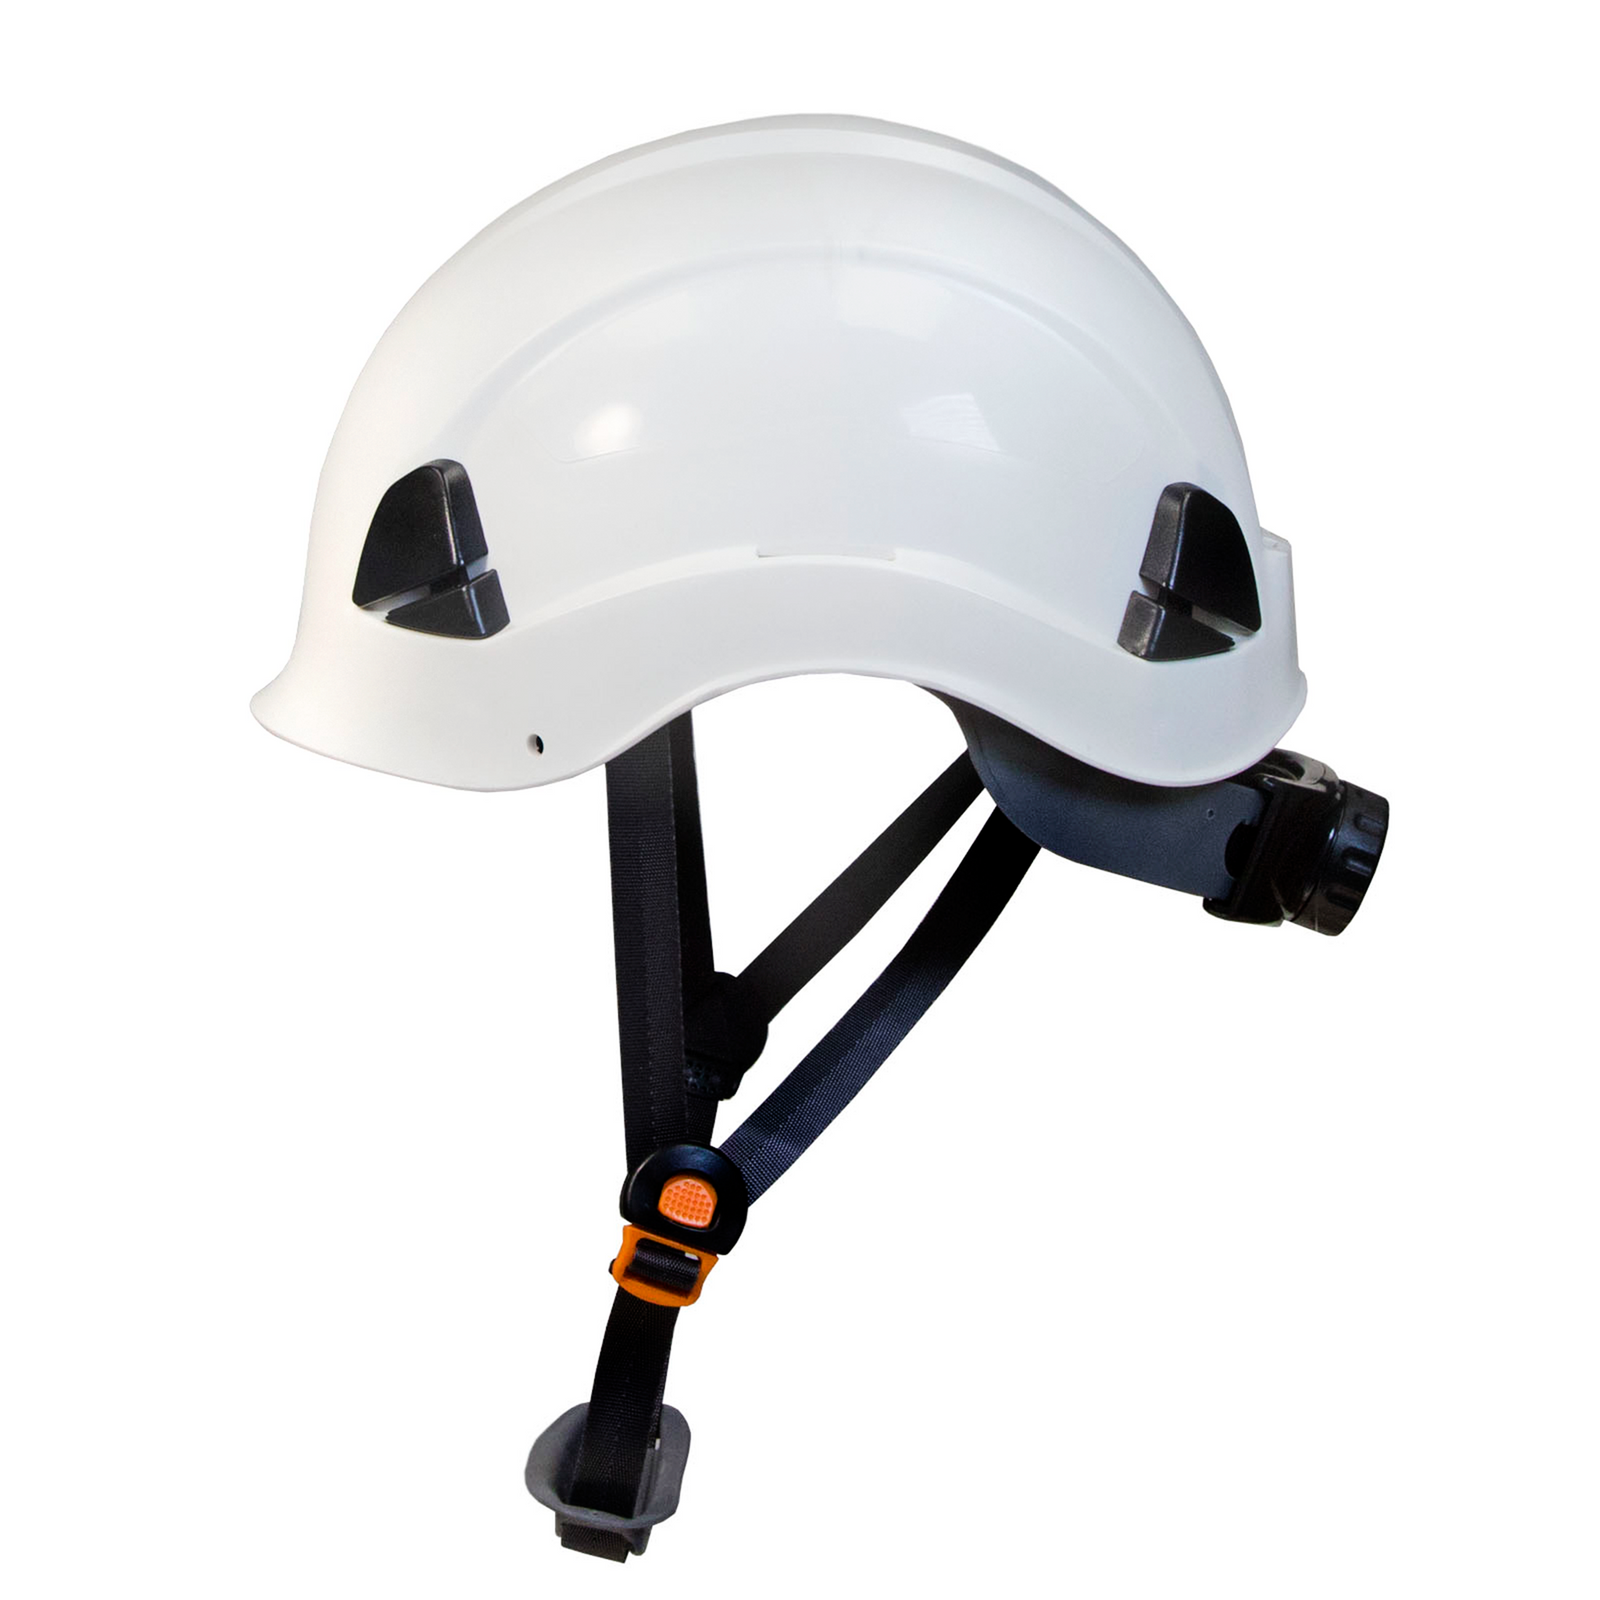 White JORESTECH® rescue hard hat with adjustable 6 point suspension and chin strap ANSI Z89.1-14 and Type I Class C, E, G